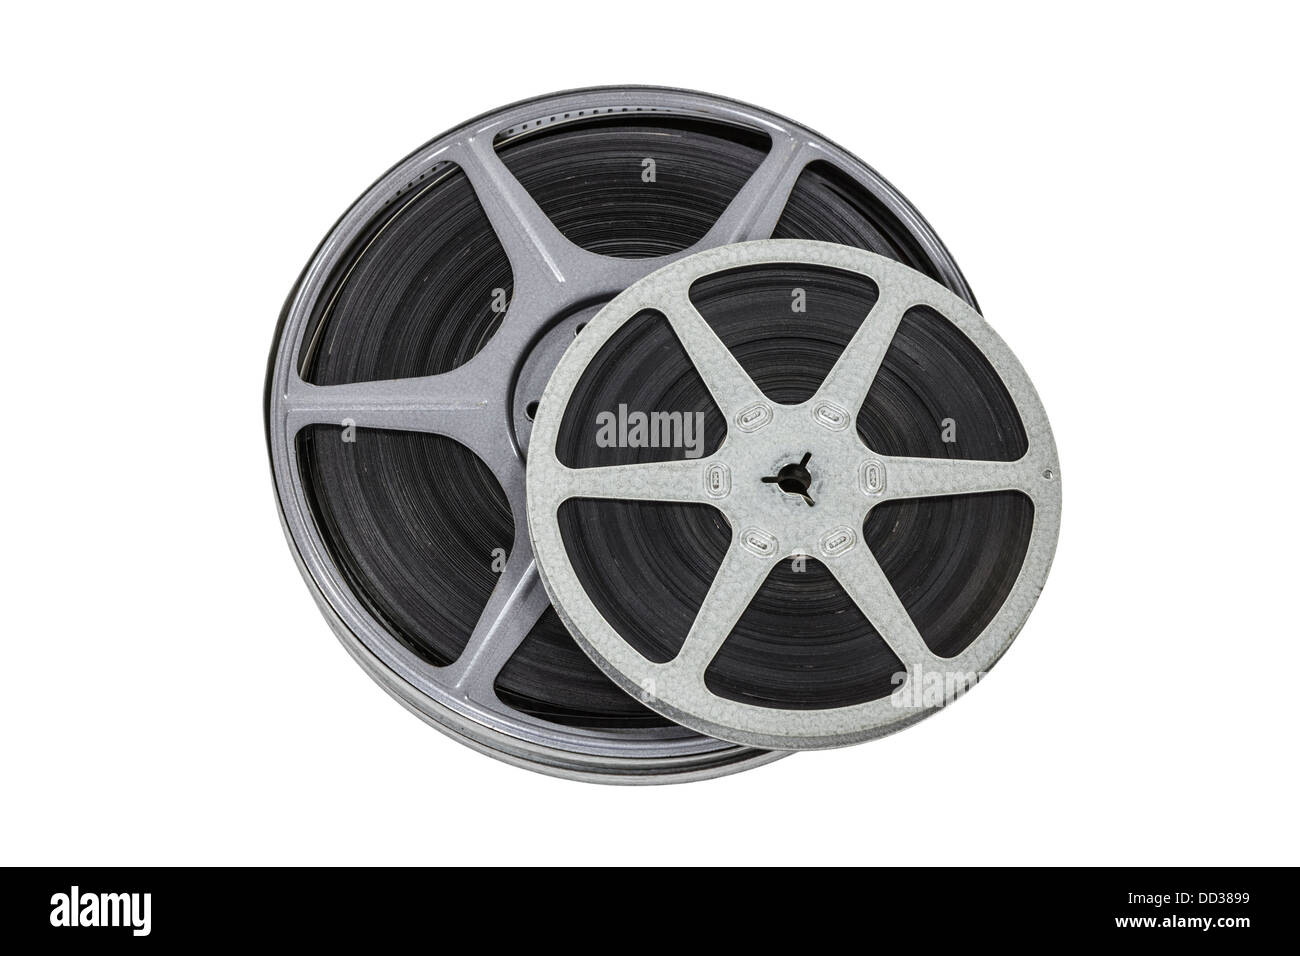 https://c8.alamy.com/comp/DD3899/vintage-8mm-film-reels-isolated-with-clipping-path-DD3899.jpg